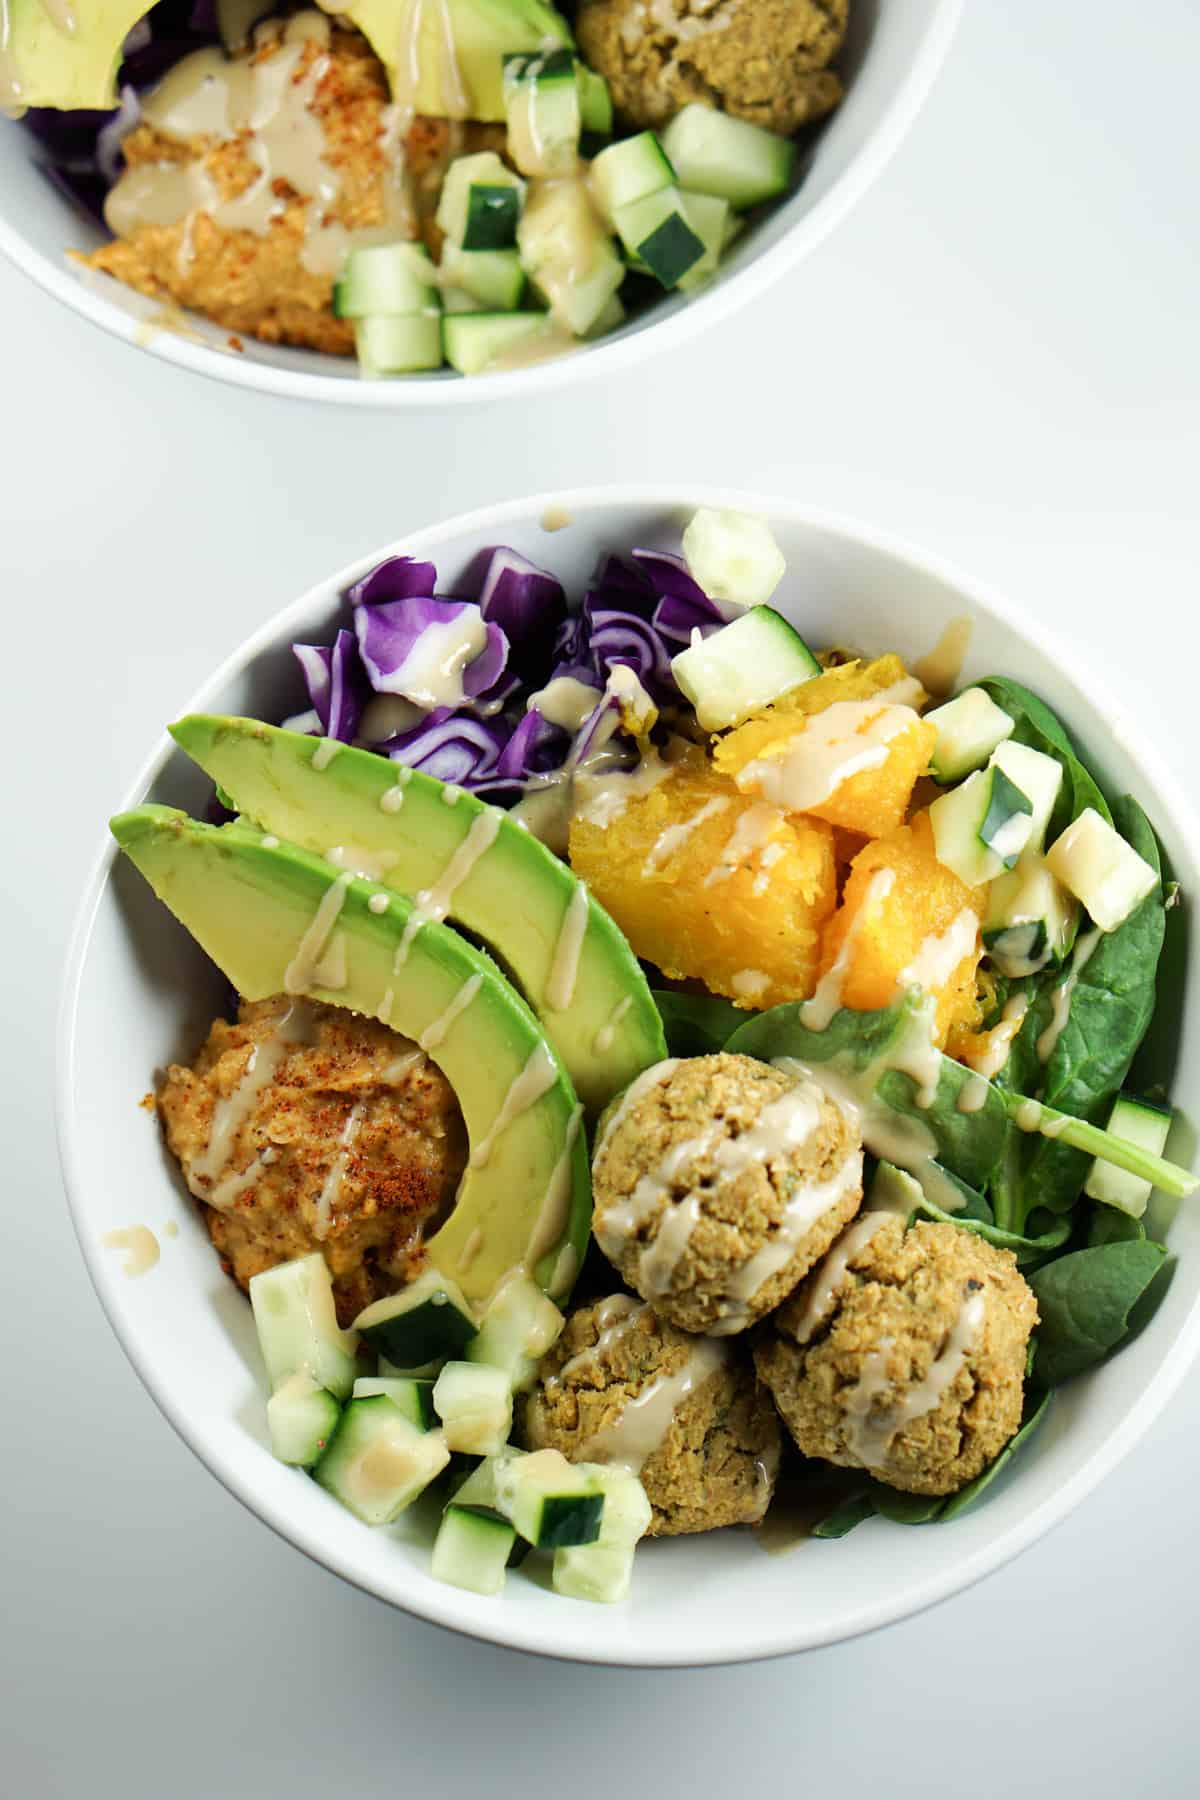 A savory alternative to salad, these quick and easy Falafel Bowls with roasted squash, avocado and harissa hummus recipe make a perfect healthy dinner.